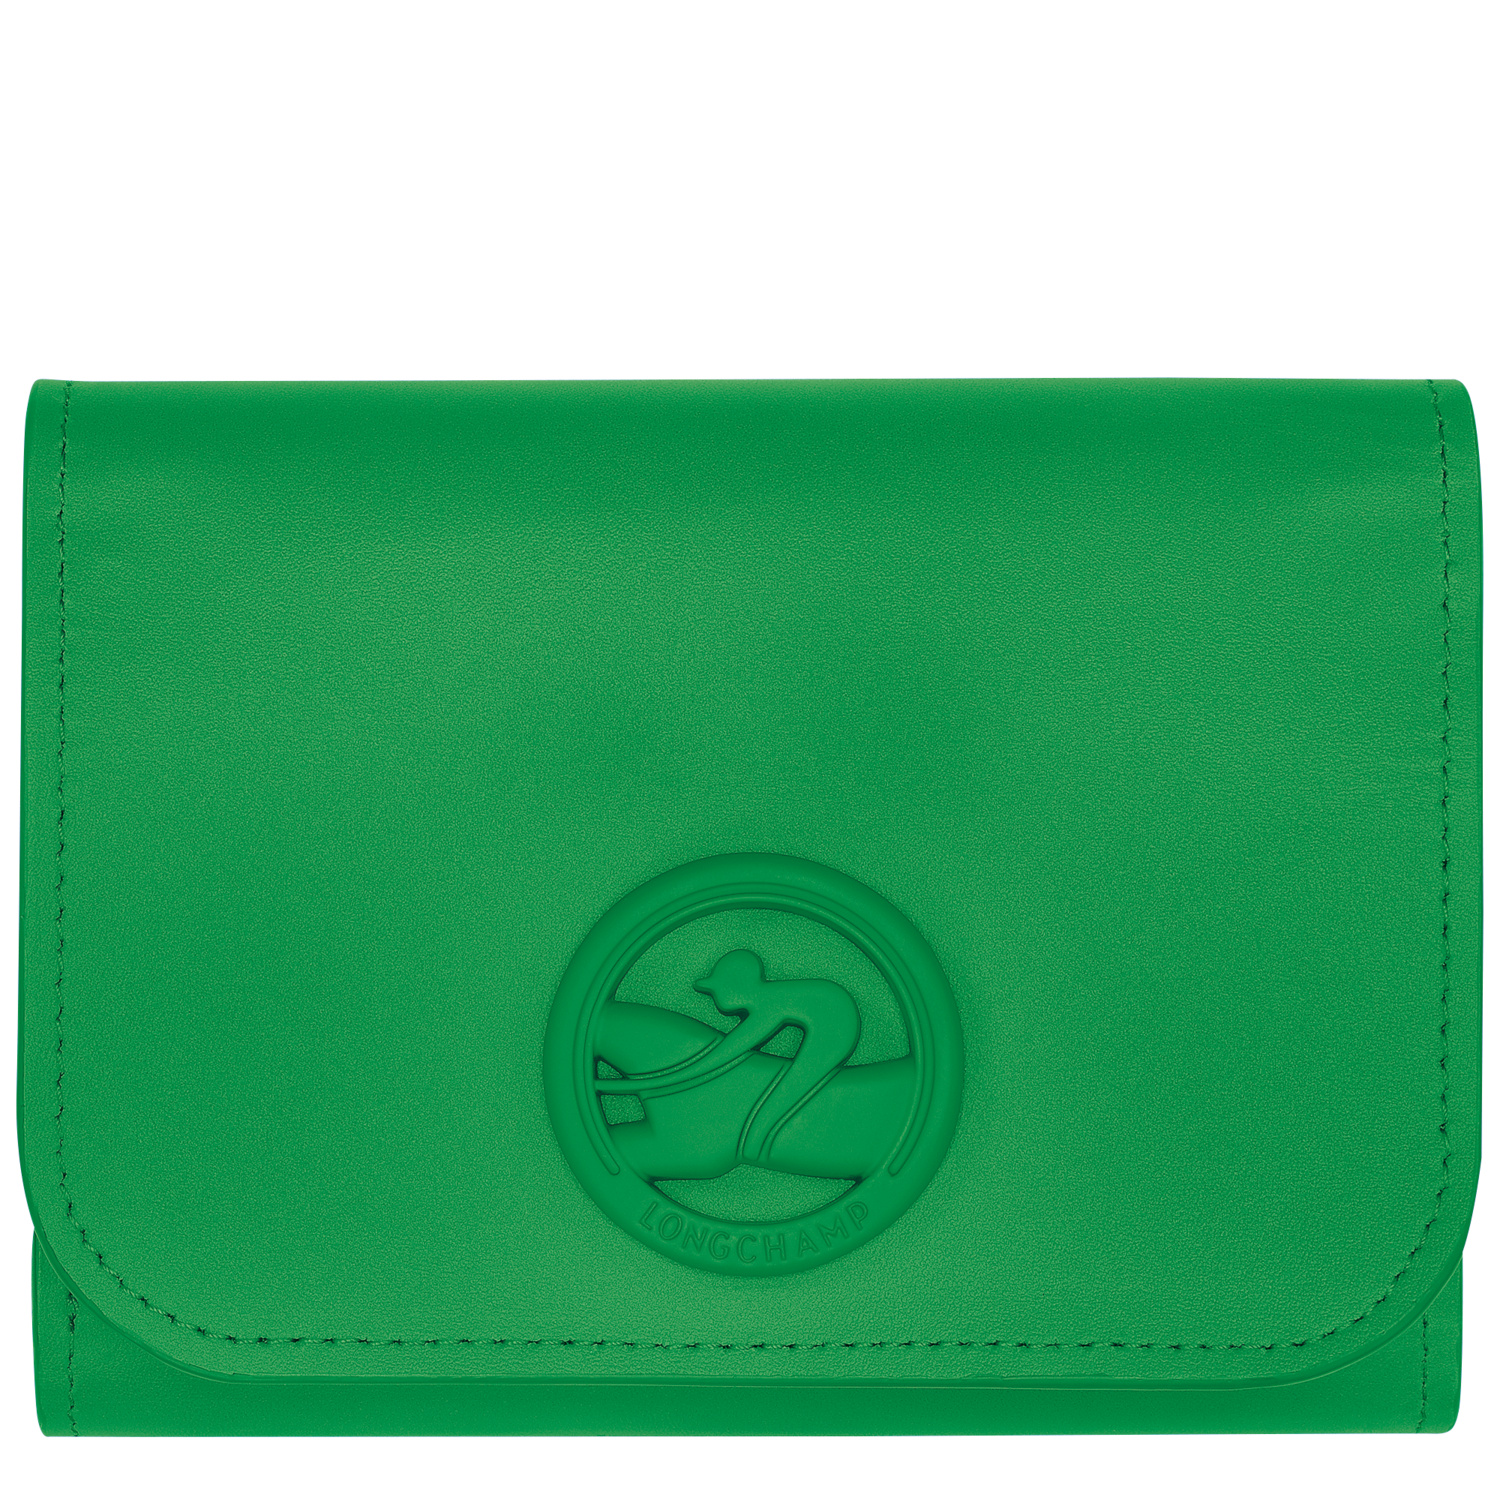 Longchamp Portefeuille Box-trot In Lawn